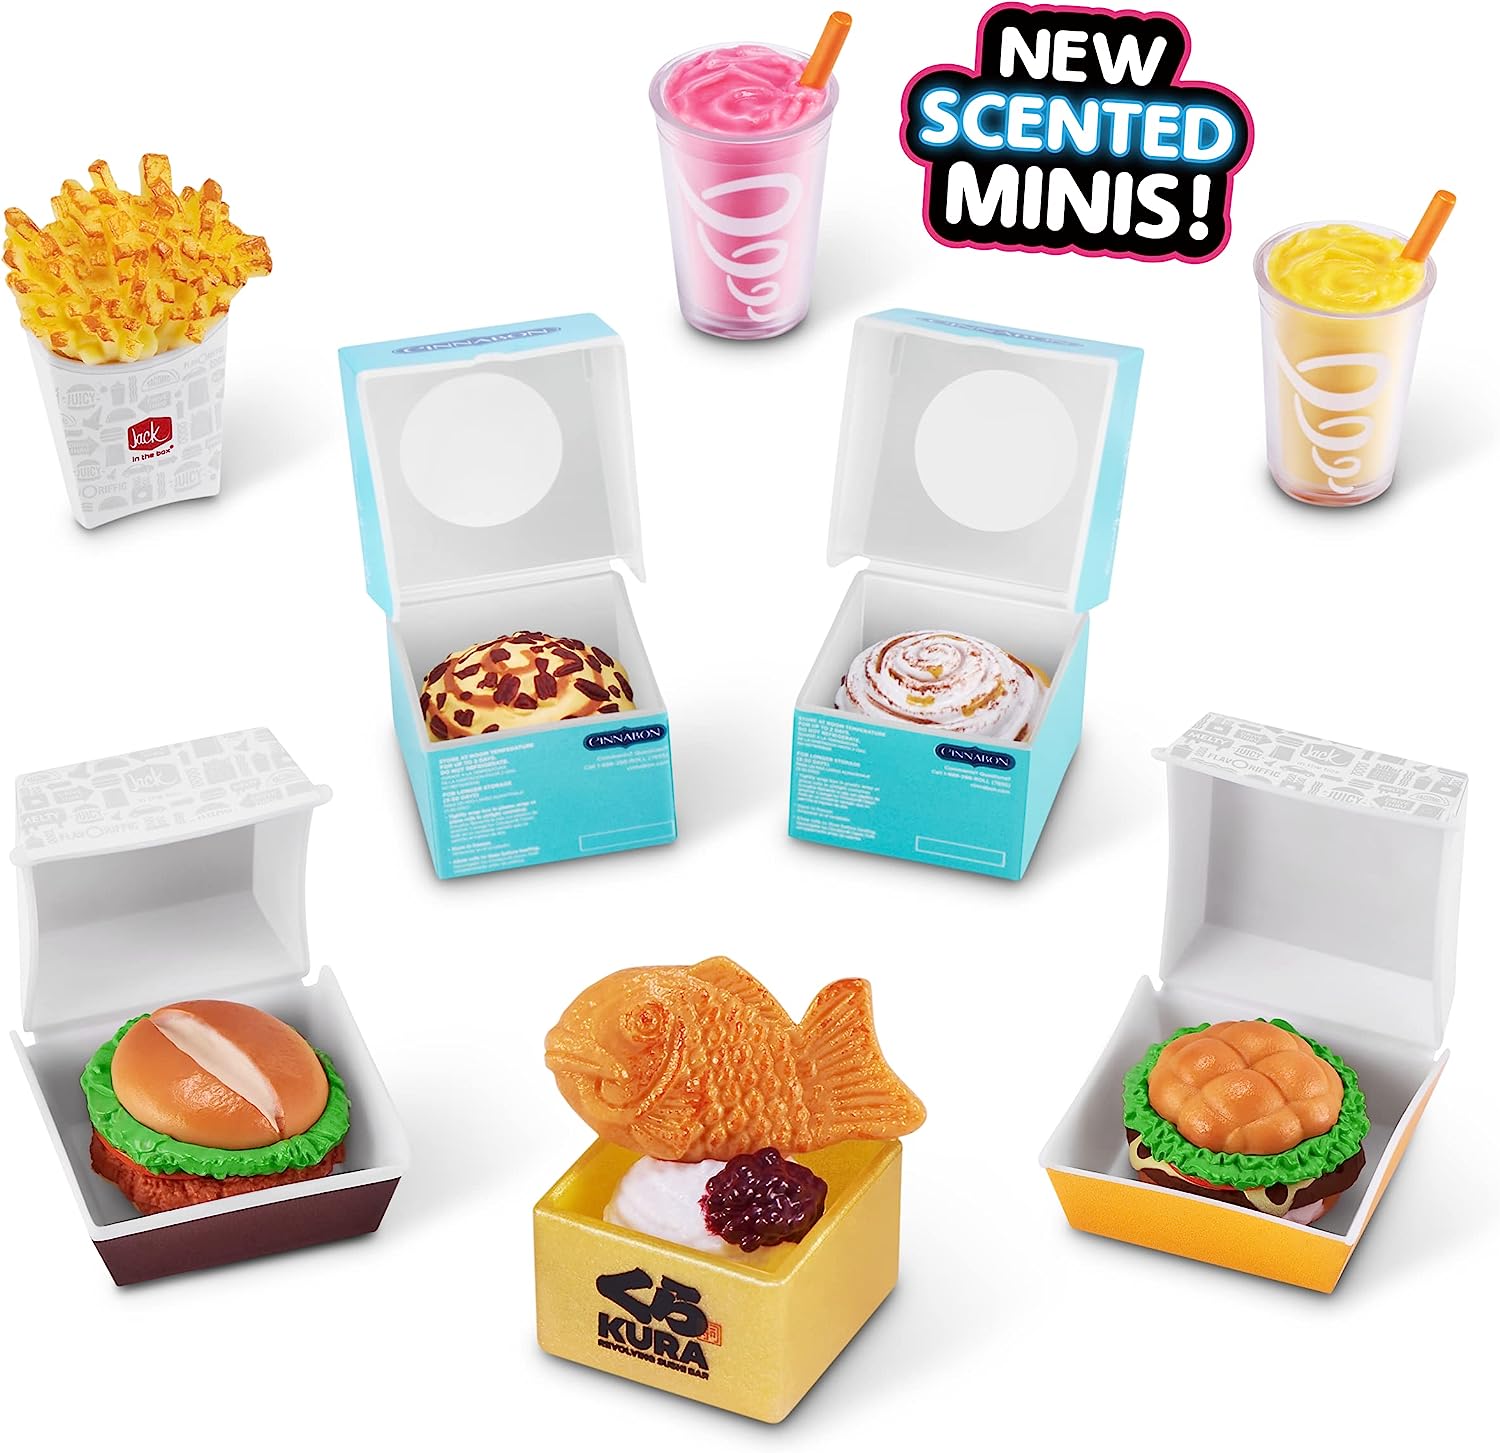 5 Surprise Foodie Mini Brands Series 2 toys - YouLoveIt.com